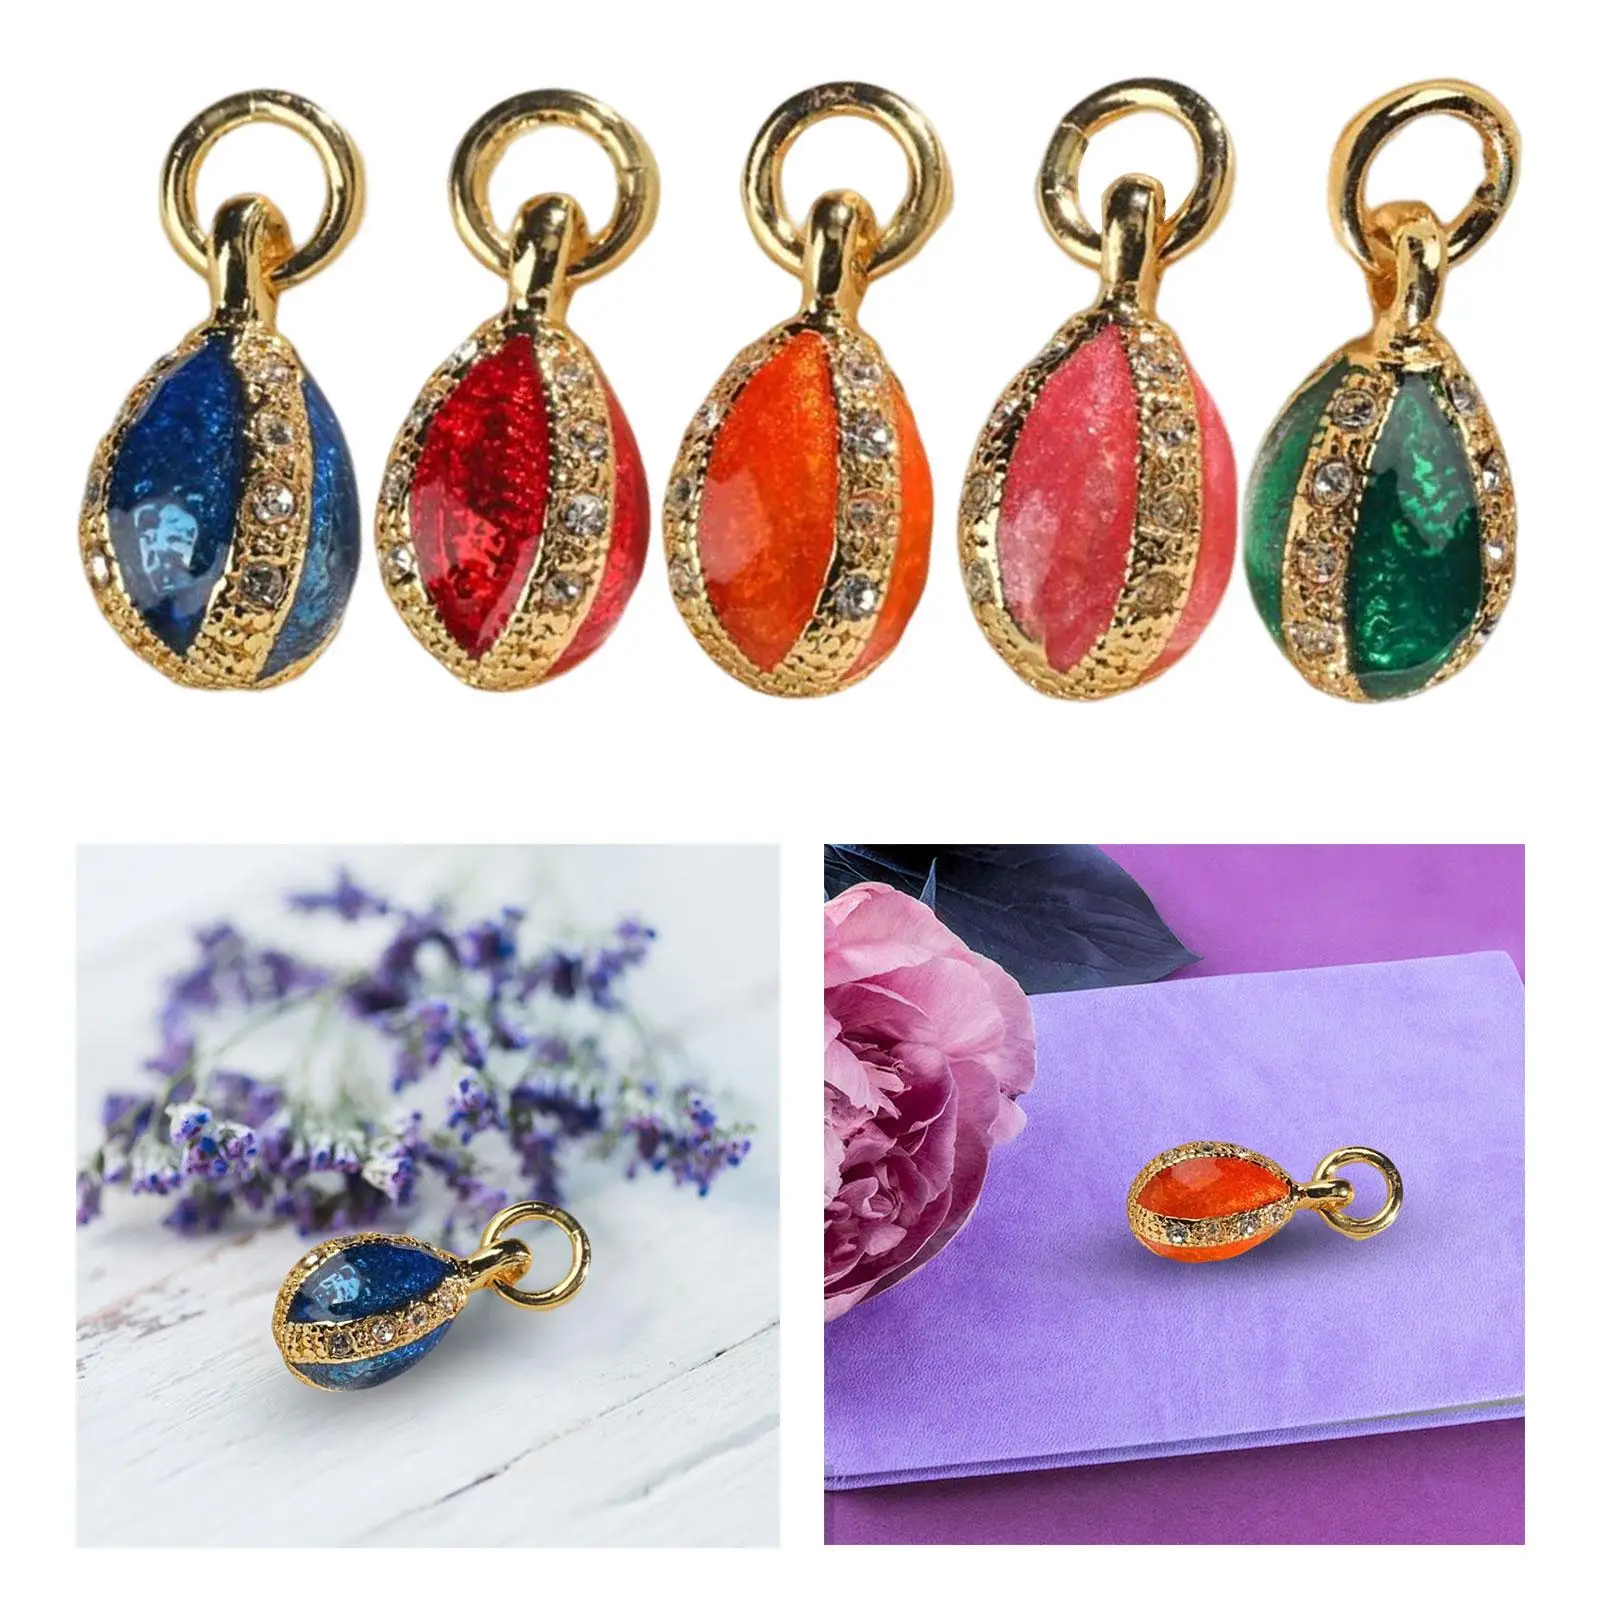 Enamel Easter Egg Pendant Charm Festival Mini Decoration Accessories Metal Gift for Keychain DIY Crafts Bracelet Jewelry Making